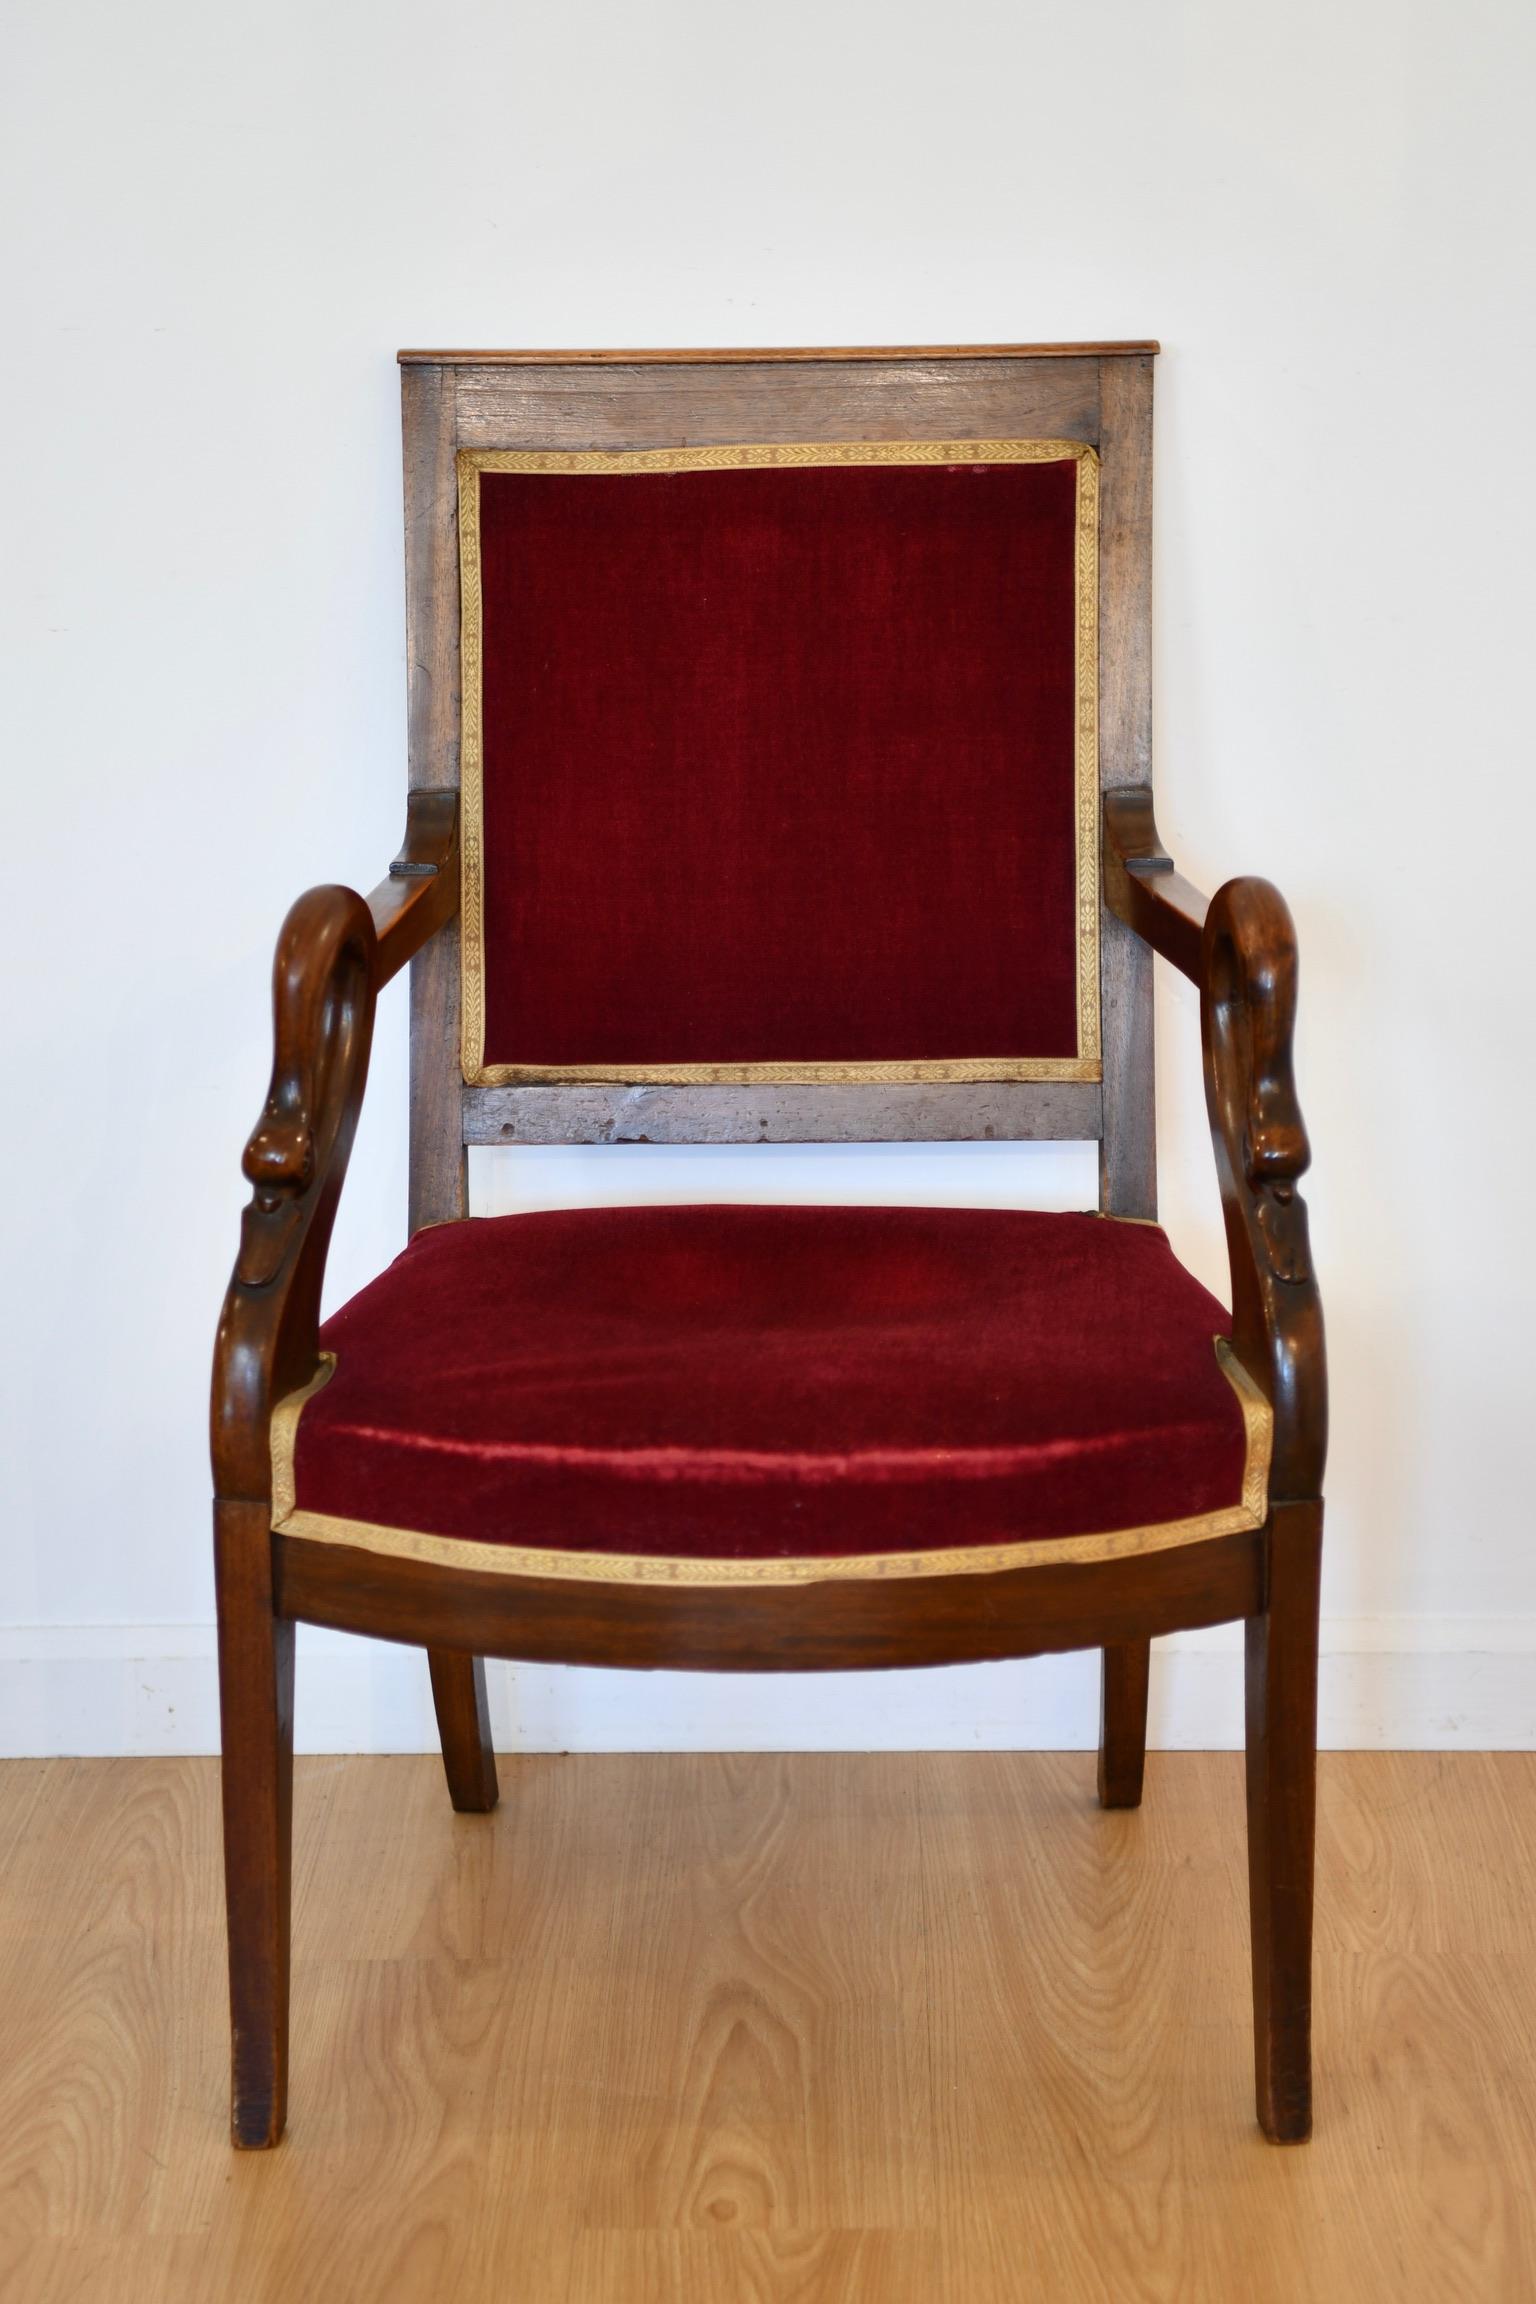 French carved mahogany armchair with swan heads, circa 1930. Two available, sold individually. Matching chaise longue available. Suken seats; may need new springs. Dimensions: 35